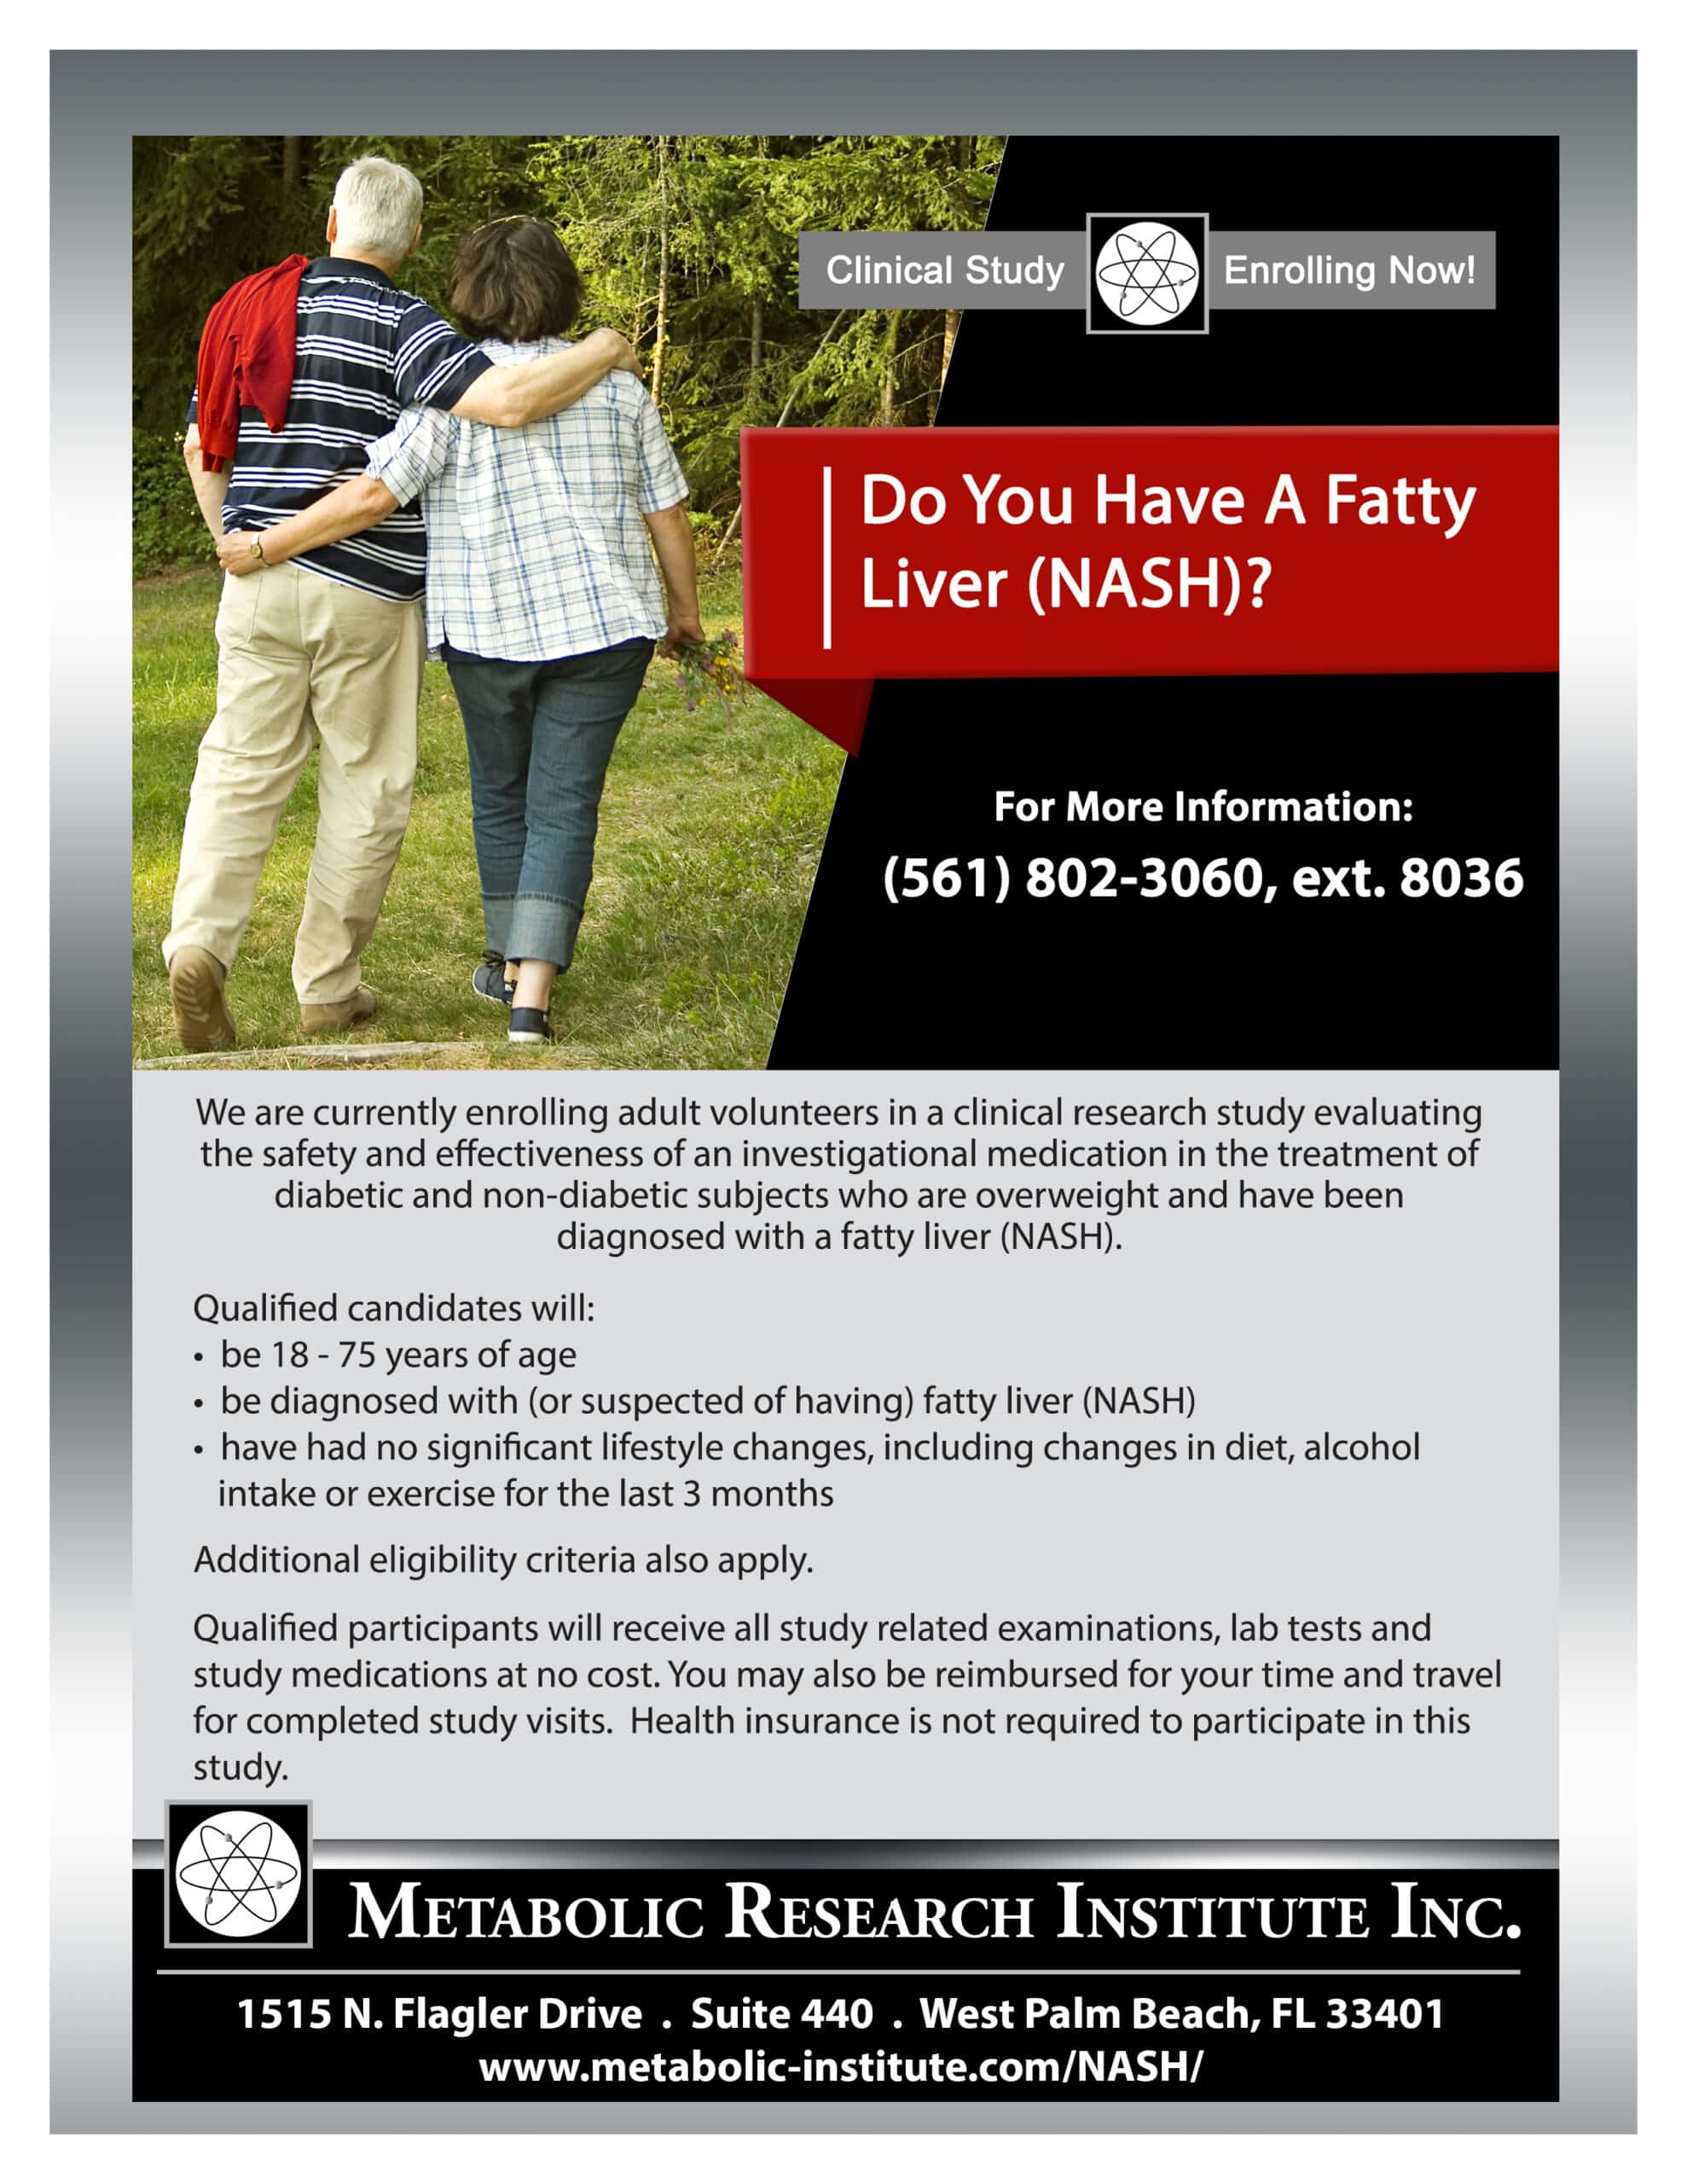 Clinical Study flyer for NASH